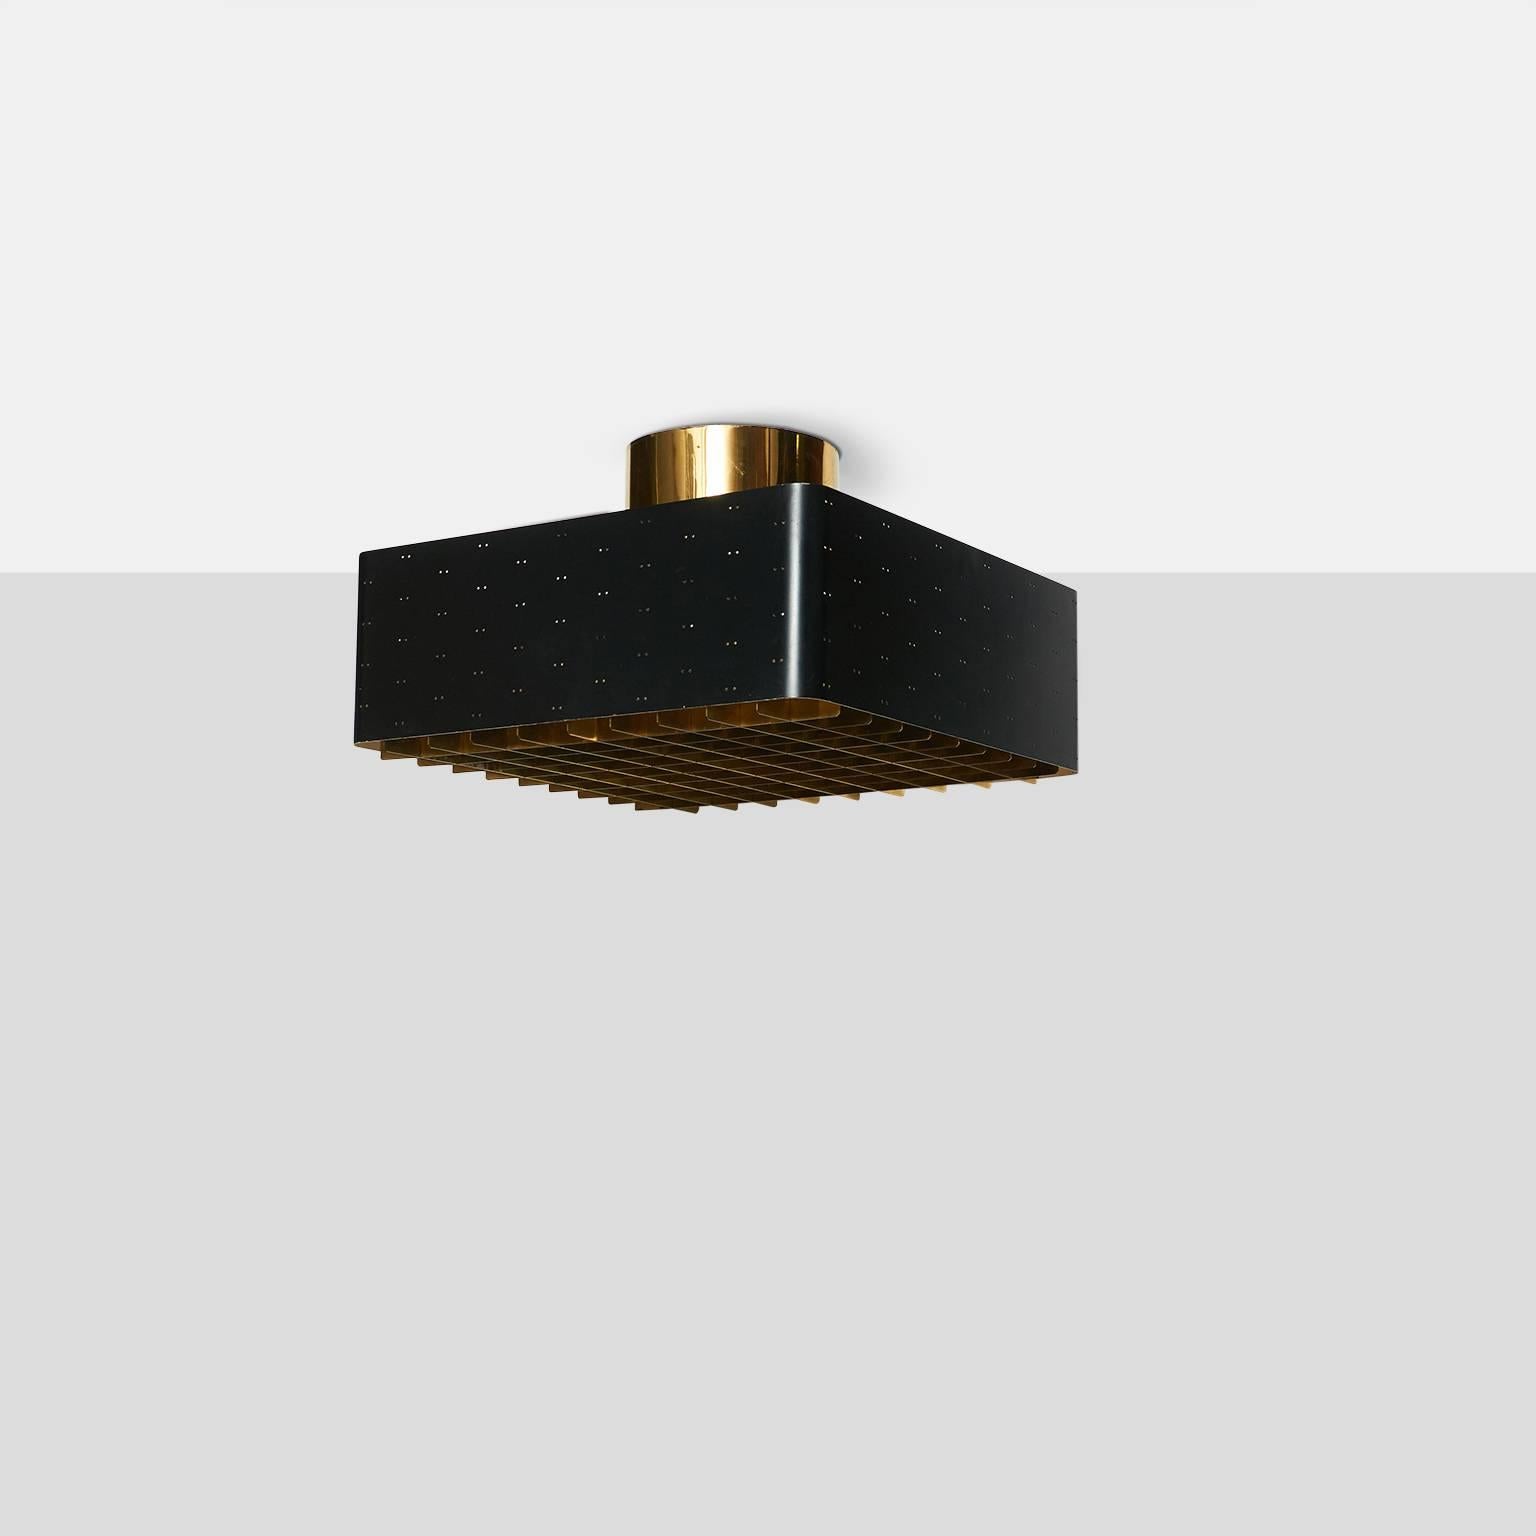 A square form ceiling fixture in black with brass grid diffuser and etched glass filter. Manufactured by Idman Oy. A pair are available.
Finland, circa 1960s.